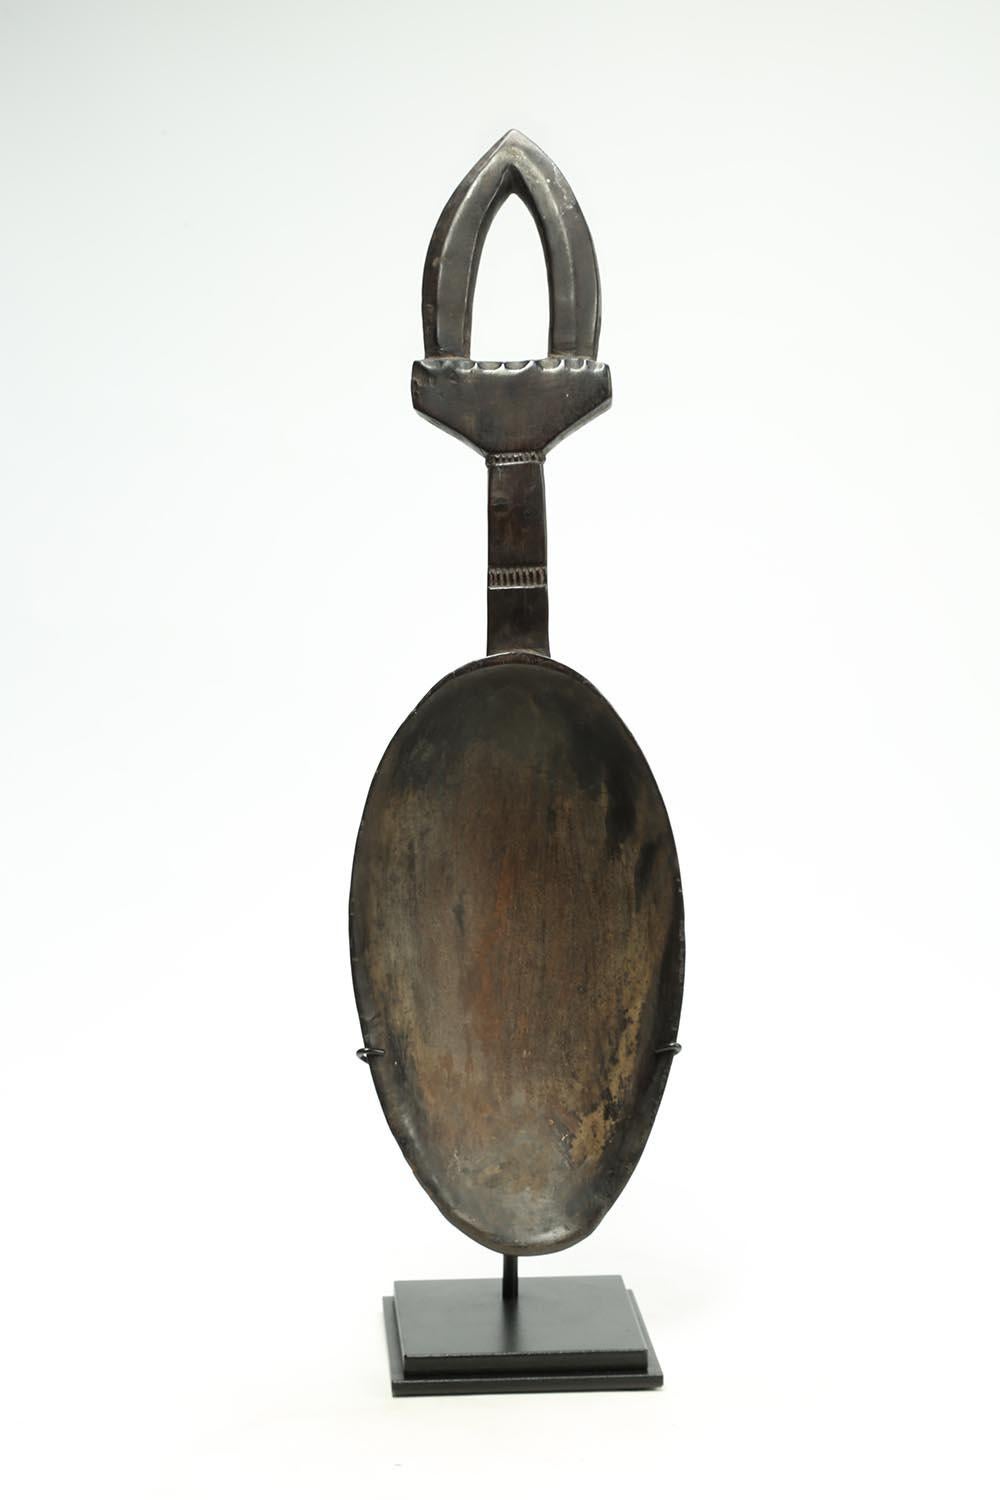 Hand-Carved Dan Tribal Ritual Rice Serving Spoon, Stylized Antelope Handle, Incised Design